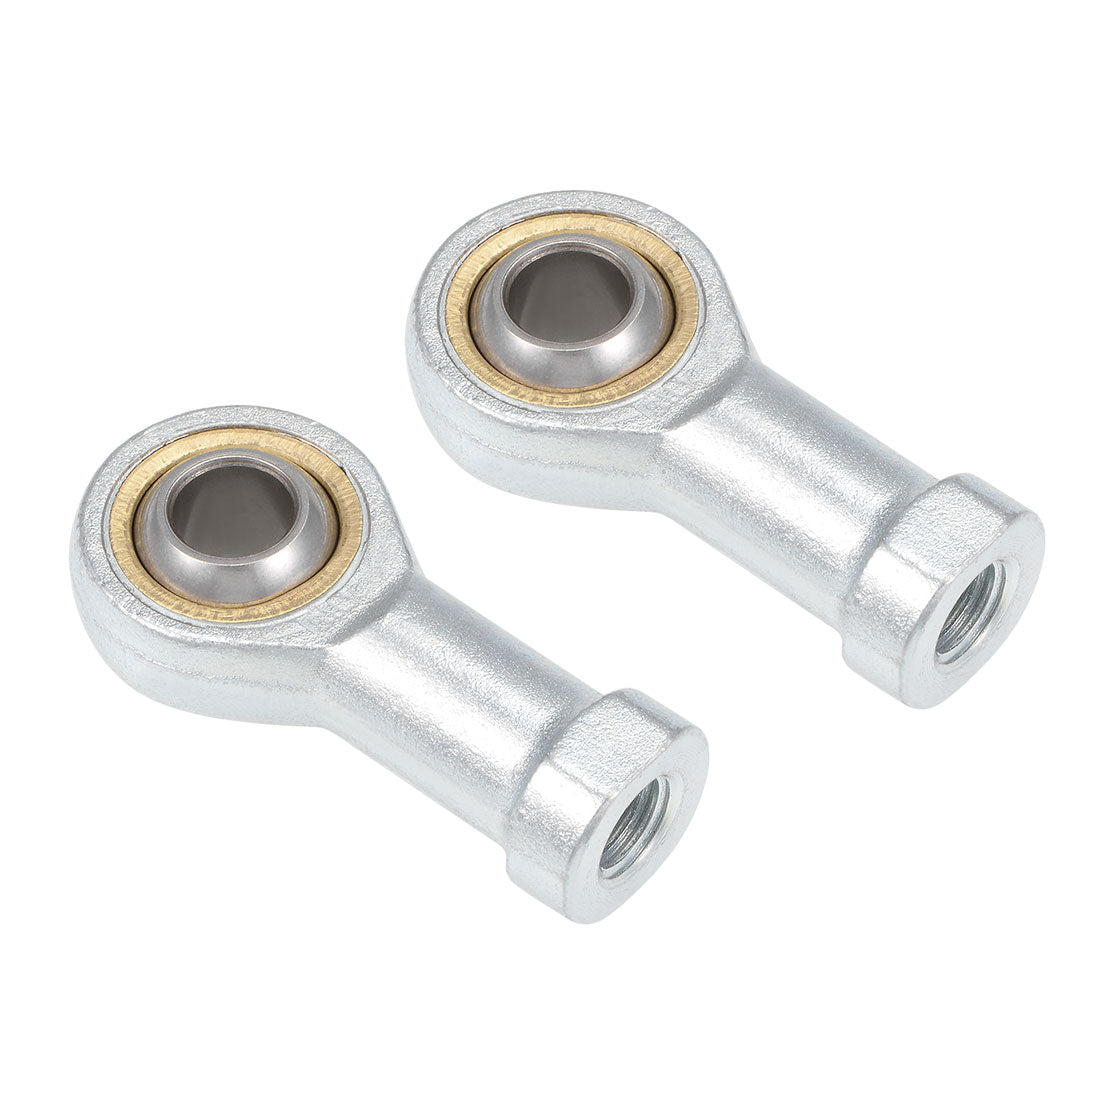 uxcell Uxcell 10mm Rod End Bearing M10x1.5mm Rod Ends Ball Joint Female Left Hand Thread 2pcs